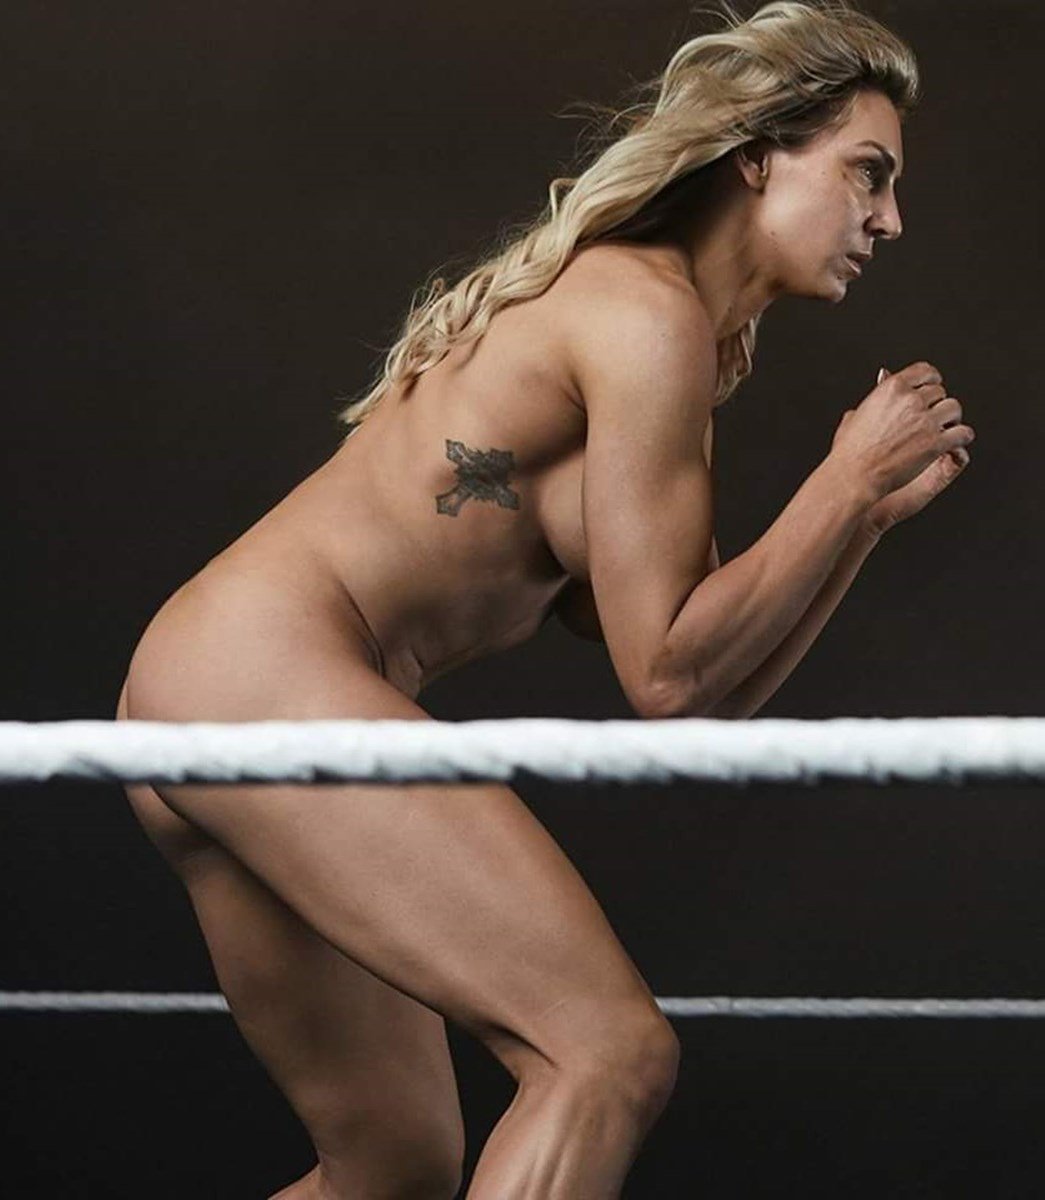 Charolette flair nude - 🧡 Charlotte Flair Nudes Leaked - So You Can See He...